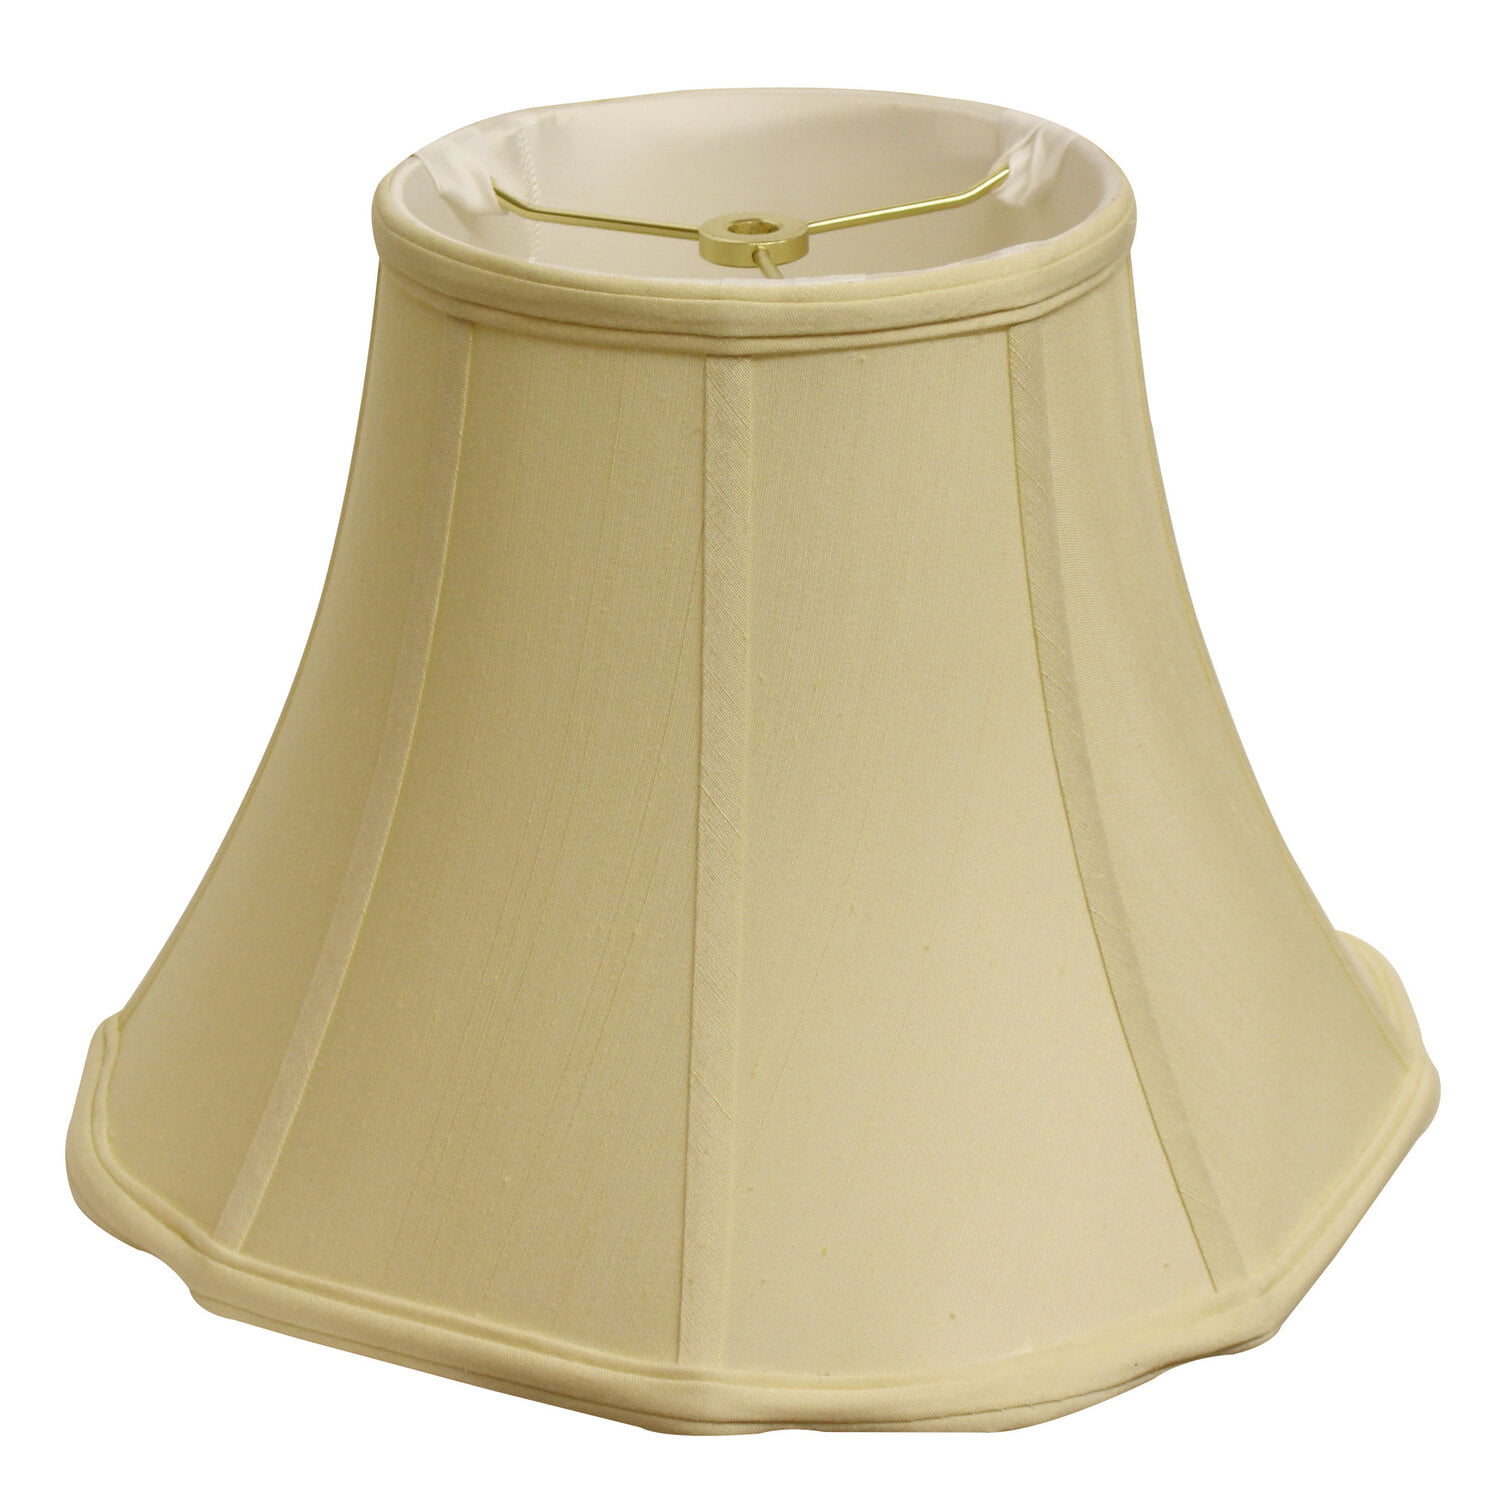 WHITE SPECIALTY SHADES x 5"w LAMPSHADES A PAIR OF FANCY 11"H x 15"w sq TOP 